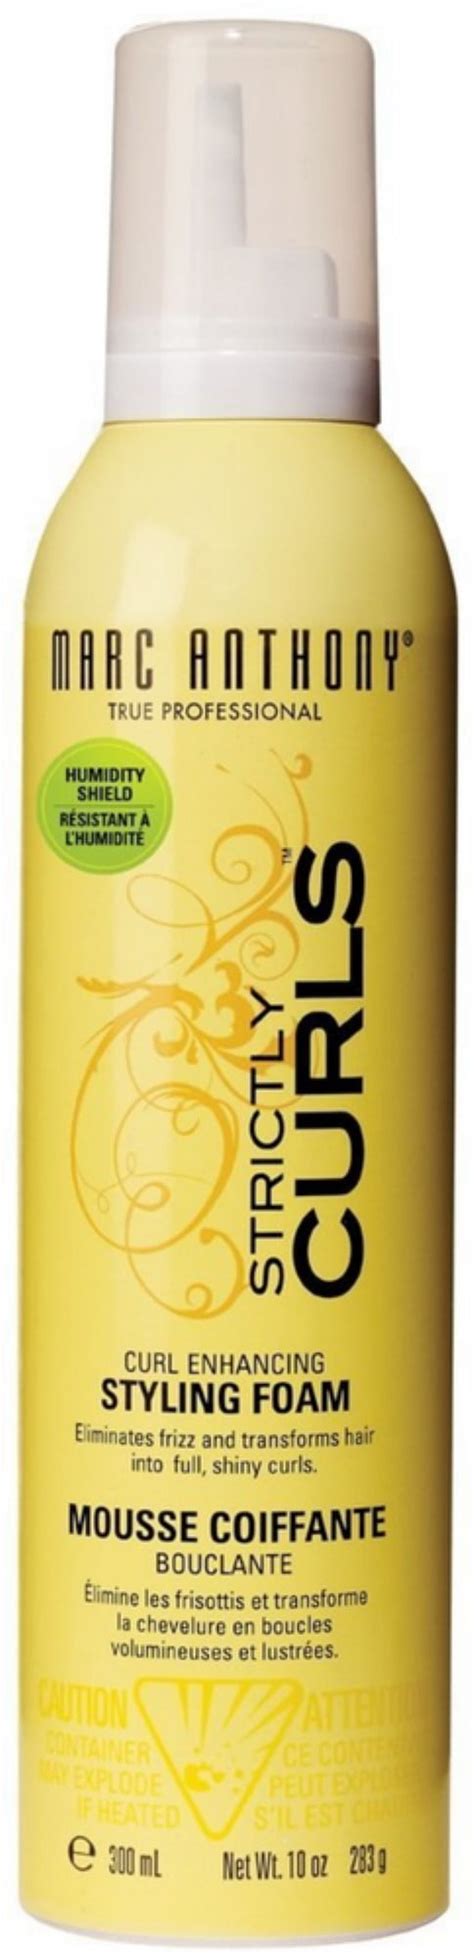 Marc Anthony Strictly Curls Curl Enhancing Styling Foam 10 Oz Pack Of